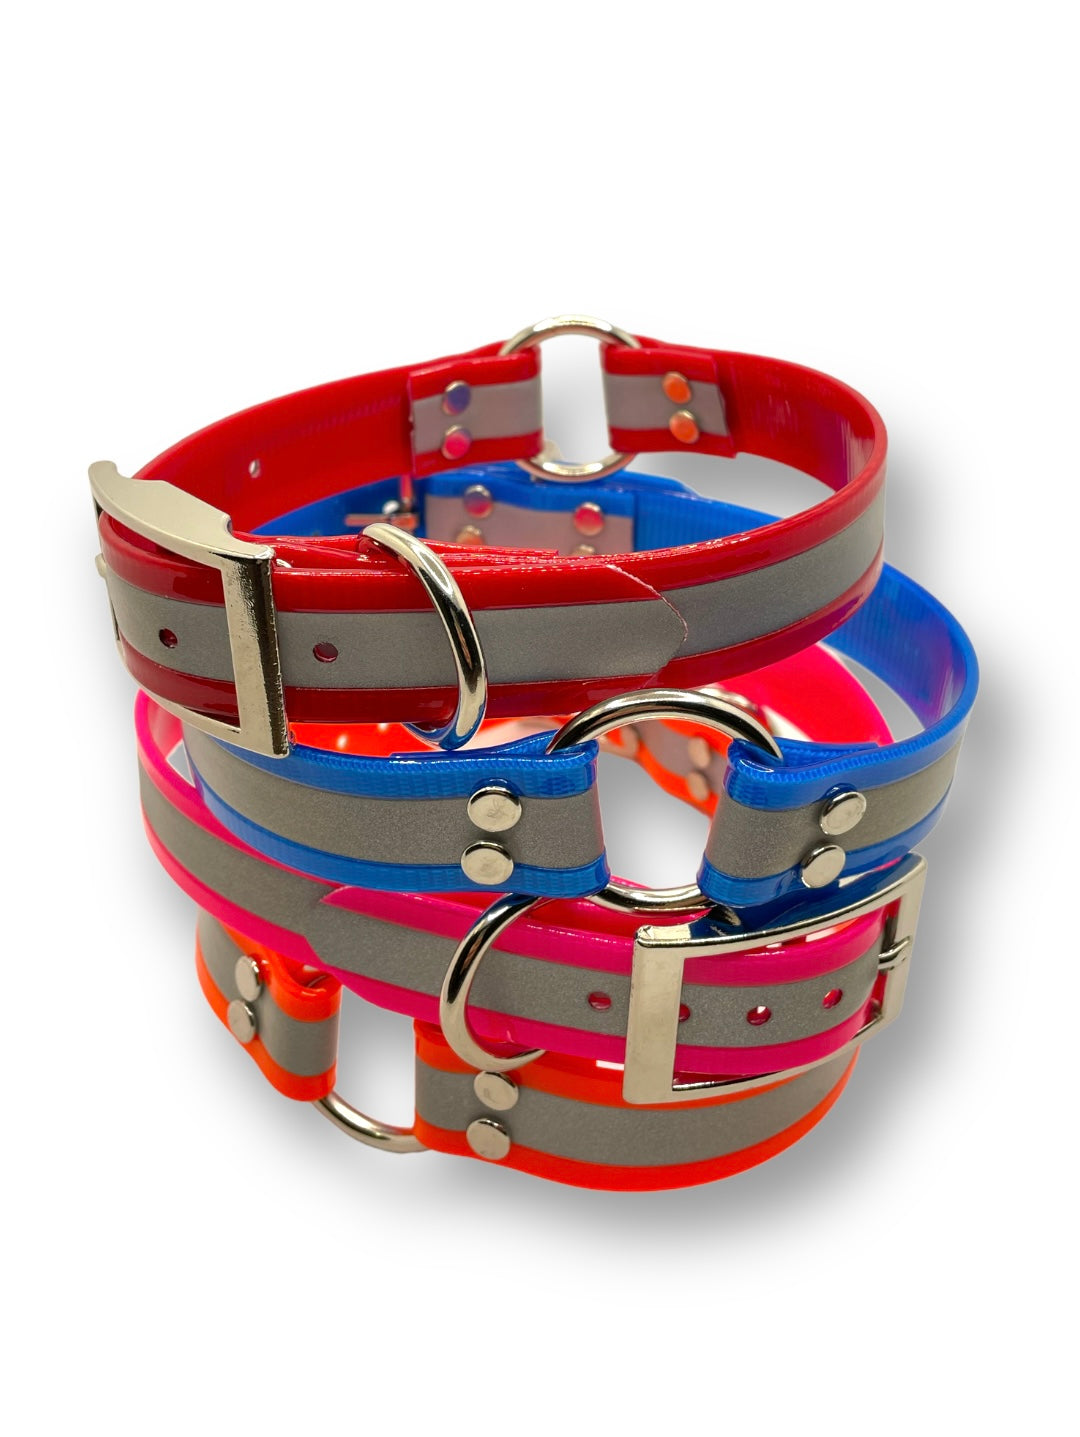 Reflective Day Glo Dog Collars with D Ring & Center Ring - 1” Wide